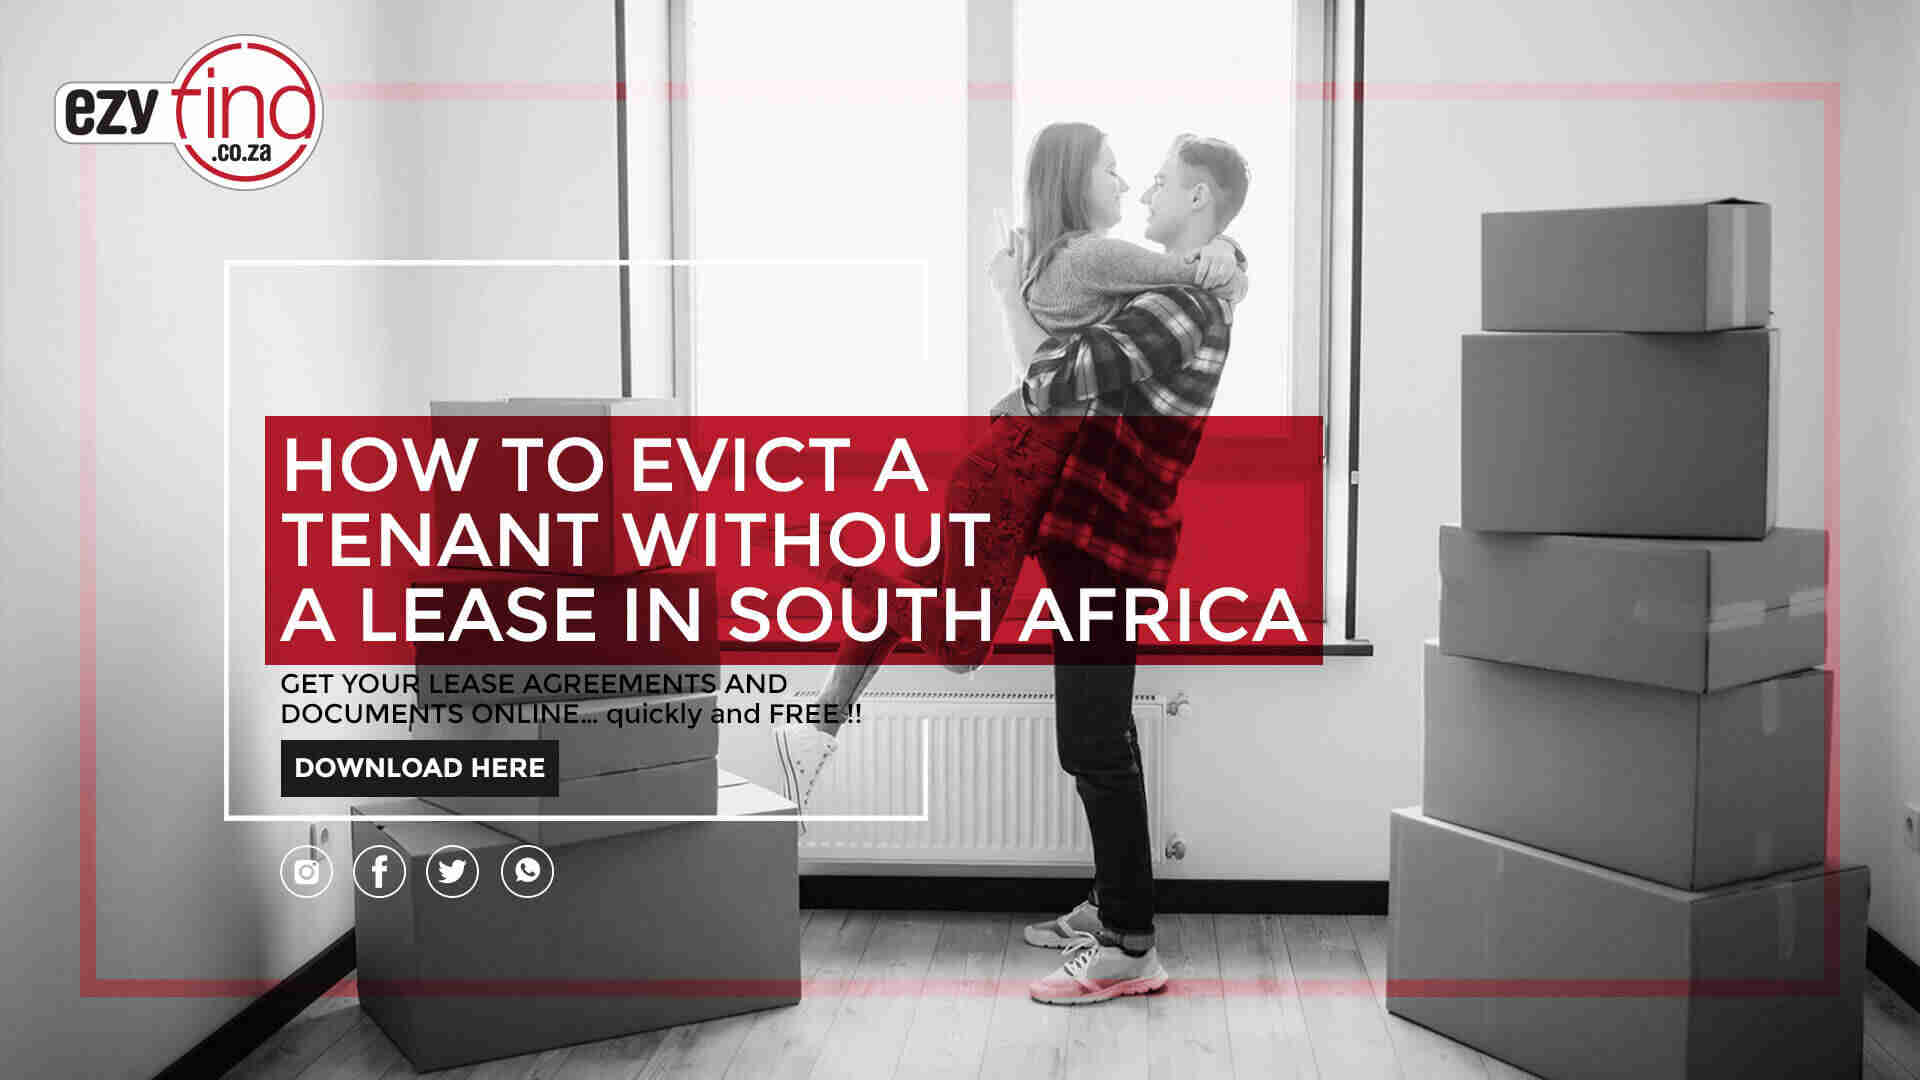 Fast free Lease Agreement 23  www.LawyersEzyFind.co.za Throughout cpa hire agreement template